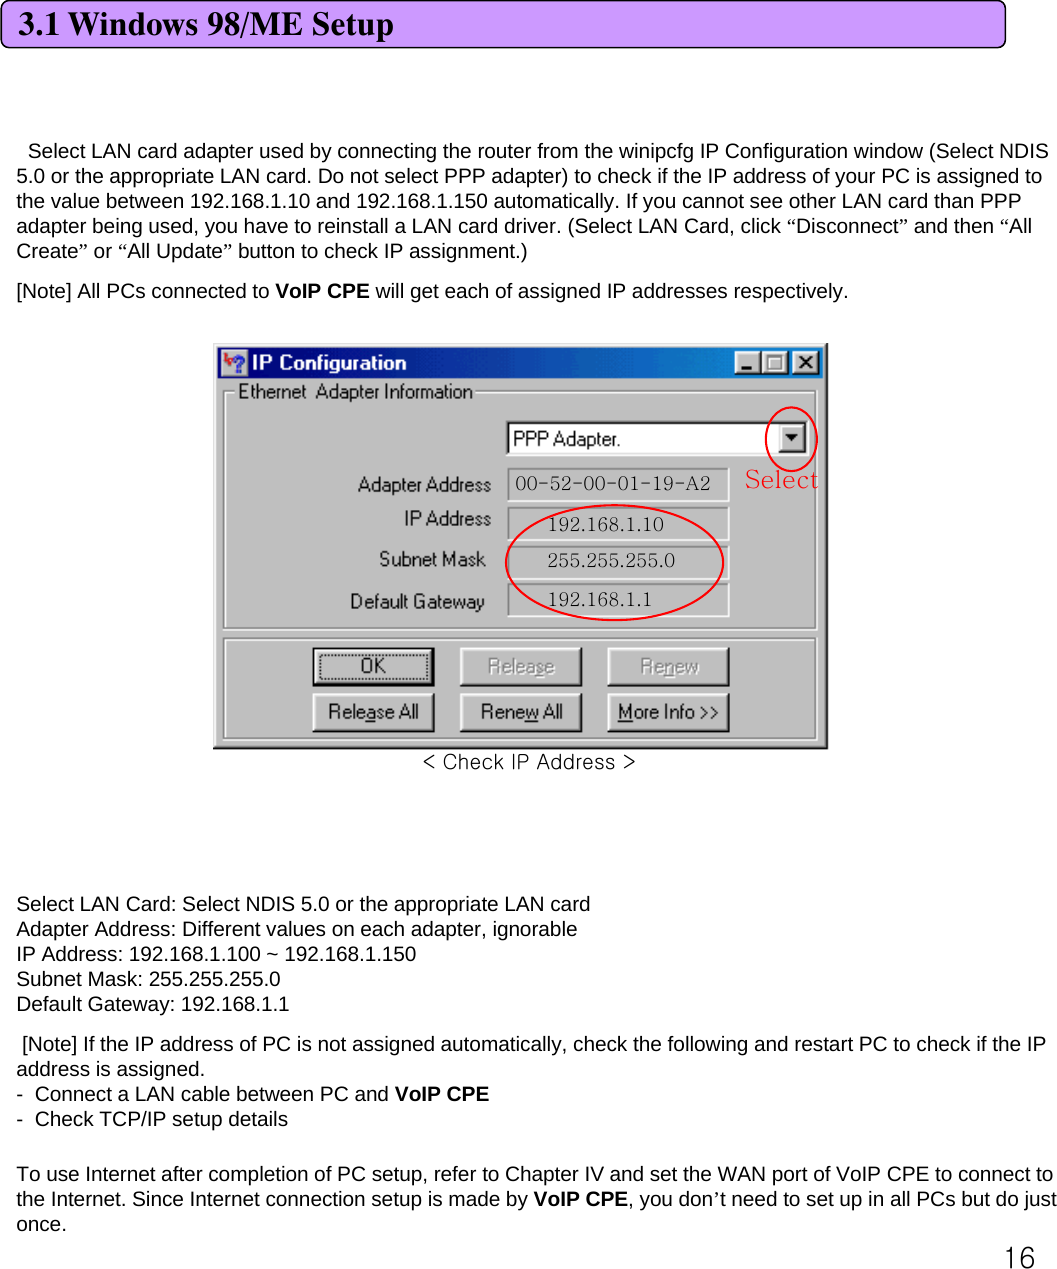 163.1 Windows 98/ME SetupSelect LAN card adapter used by connecting the router from the winipcfg IP Configuration window (Select NDIS 5.0 or the appropriate LAN card. Do not select PPP adapter) to check if the IP address of your PC is assigned to the value between 192.168.1.10 and 192.168.1.150 automatically. If you cannot see other LAN card than PPP adapter being used, you have to reinstall a LAN card driver. (Select LAN Card, click “Disconnect”and then “All Create”or “All Update”button to check IP assignment.) [Note] All PCs connected to VoIP CPE will get each of assigned IP addresses respectively. 00-52-00-01-19-A2192.168.1.10255.255.255.0192.168.1.1SelectSelect LAN Card: Select NDIS 5.0 or the appropriate LAN cardAdapter Address: Different values on each adapter, ignorableIP Address: 192.168.1.100 ~ 192.168.1.150Subnet Mask: 255.255.255.0Default Gateway: 192.168.1.1[Note] If the IP address of PC is not assigned automatically, check the following and restart PC to check if the IP address is assigned. - Connect a LAN cable between PC and VoIP CPE- Check TCP/IP setup detailsTo use Internet after completion of PC setup, refer to Chapter IV and set the WAN port of VoIP CPE to connect to the Internet. Since Internet connection setup is made by VoIP CPE, you don’t need to set up in all PCs but do just once. &lt; Check IP Address &gt;